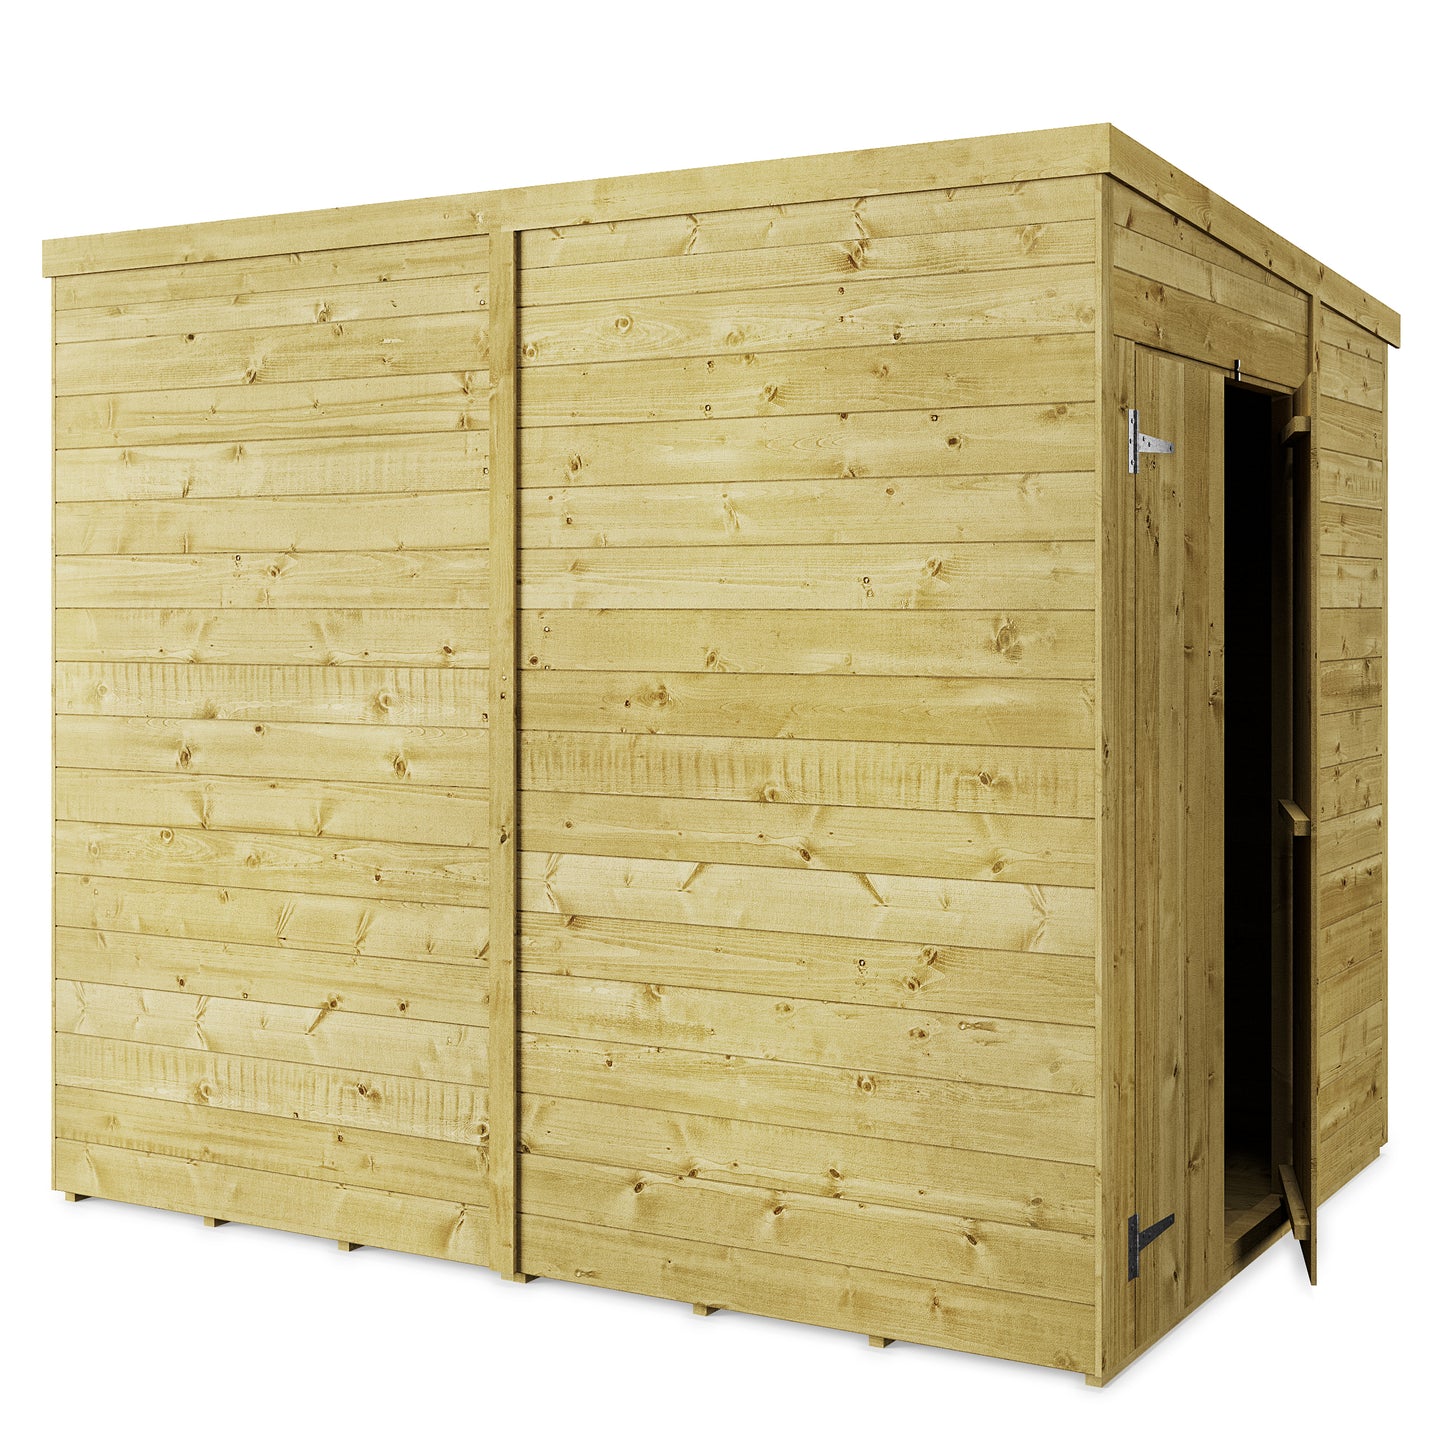 Store More 8 x 6 Tongue and Groove Pent Shed - Premium Garden